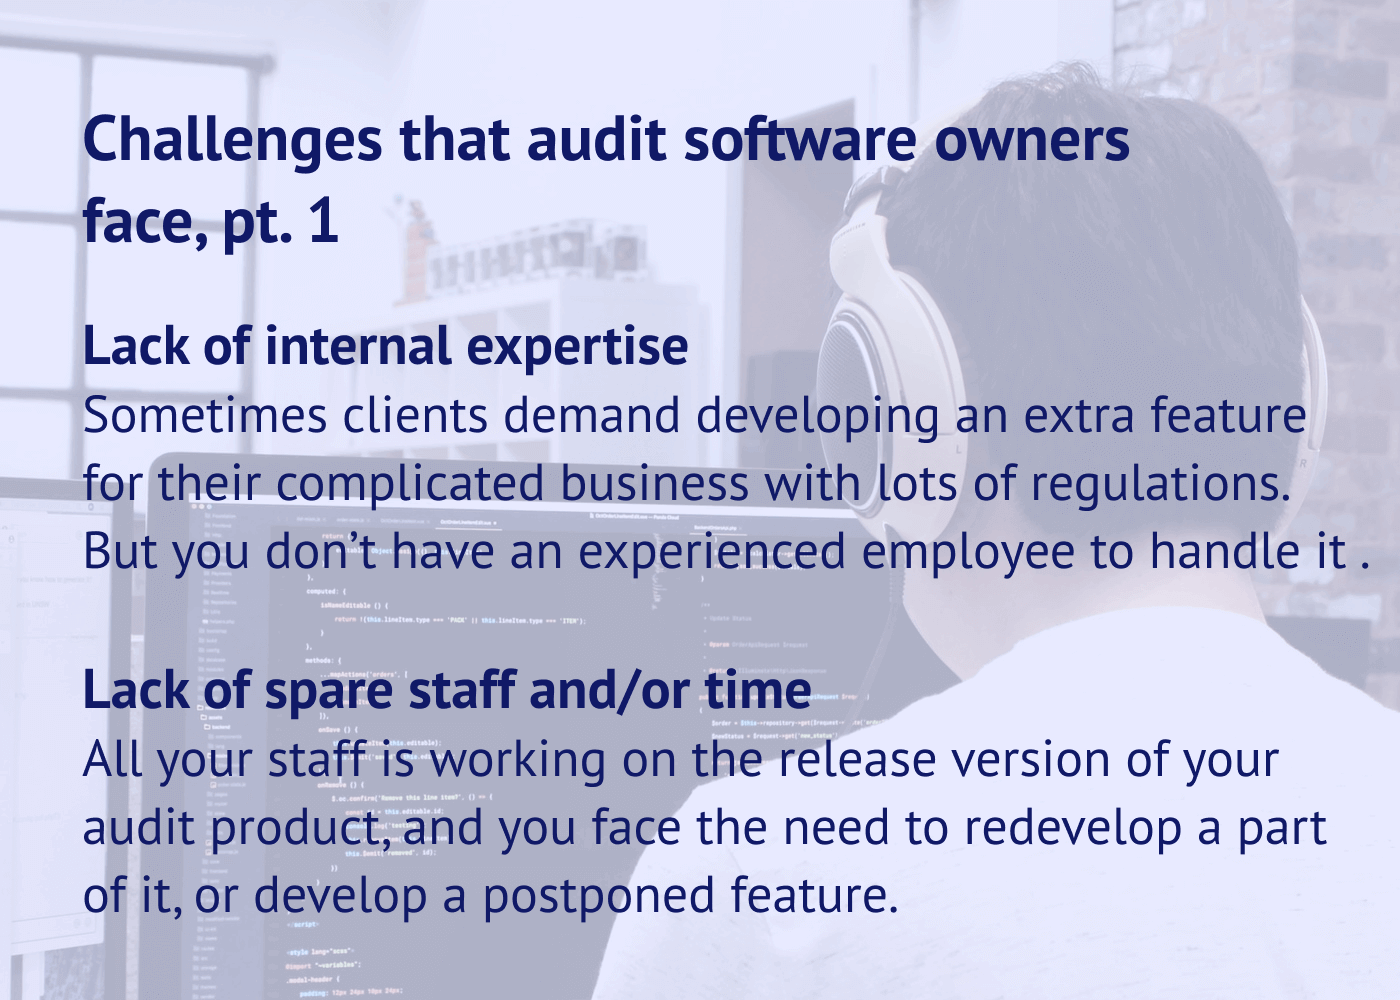 Challenges of audit software owners, part 1.